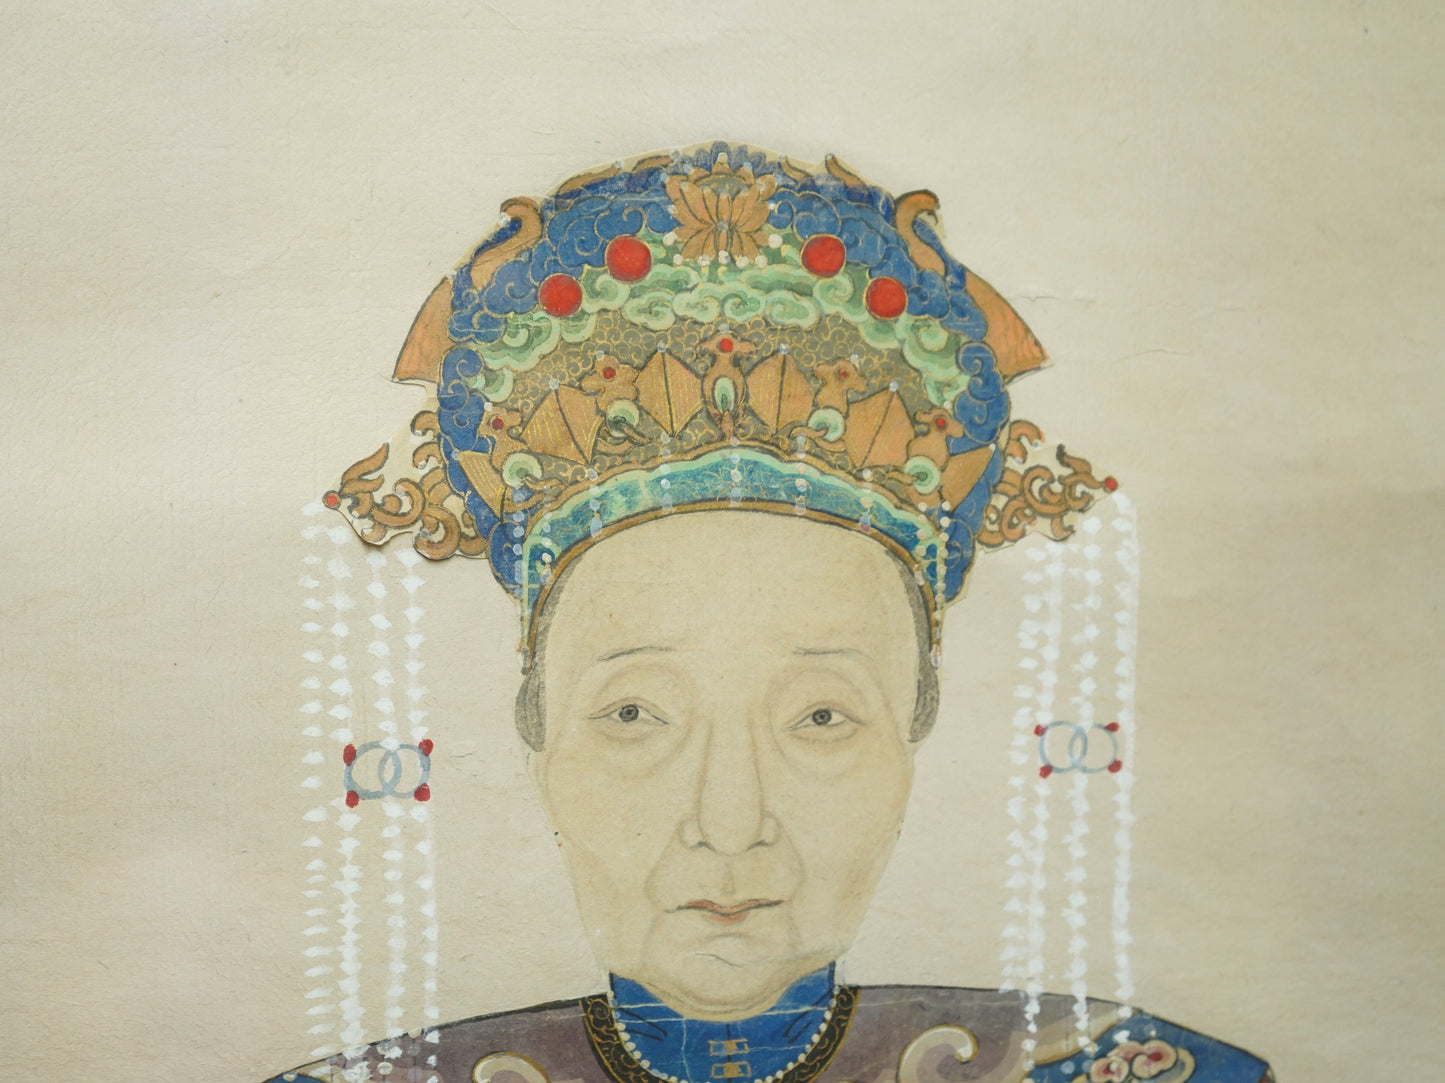 TWO CHINESE ANCESTOR PORTRAITS OF A CIVIL OFFICIAL AND AN OFFICAL'S WIFE